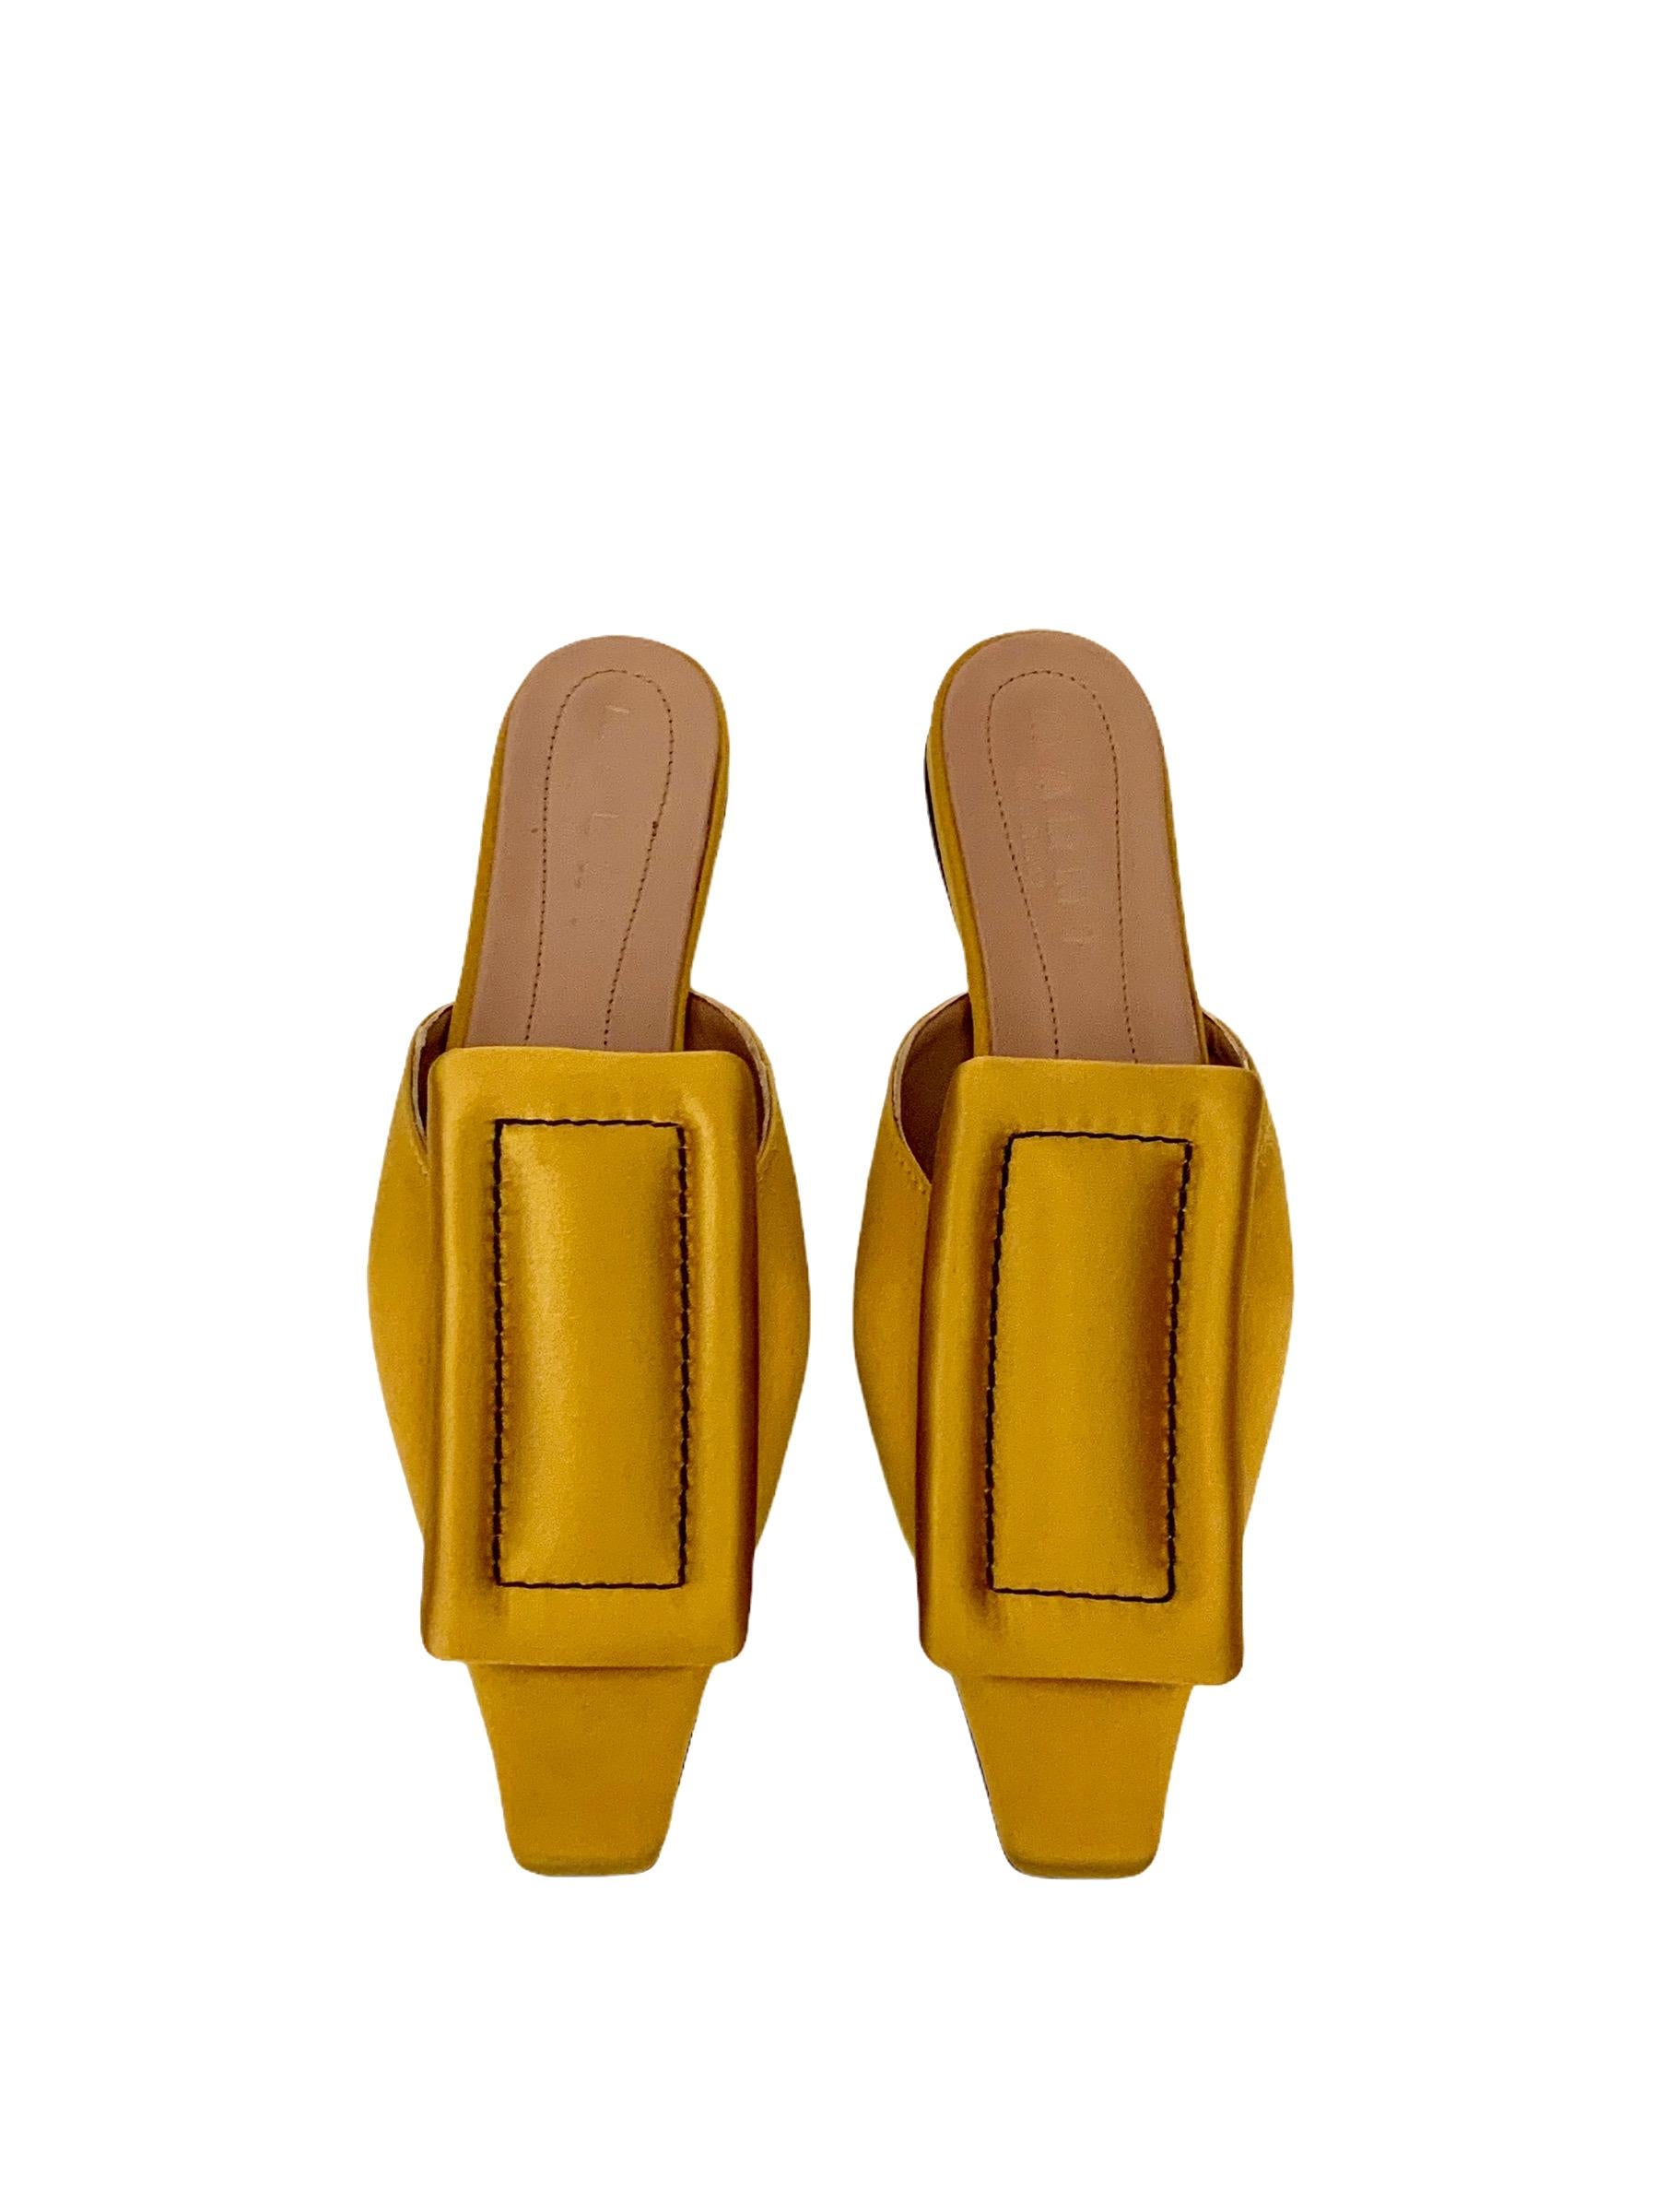 These pre-owned but new square-toe mules from the house of Marni are crafted in a beautiful yellow gold satin with contrast stitching.
Flat heels covered with matching satin.

Collection: Spring-Summer 2021
Fabric: 72% viscose, 28% silk
Insole and